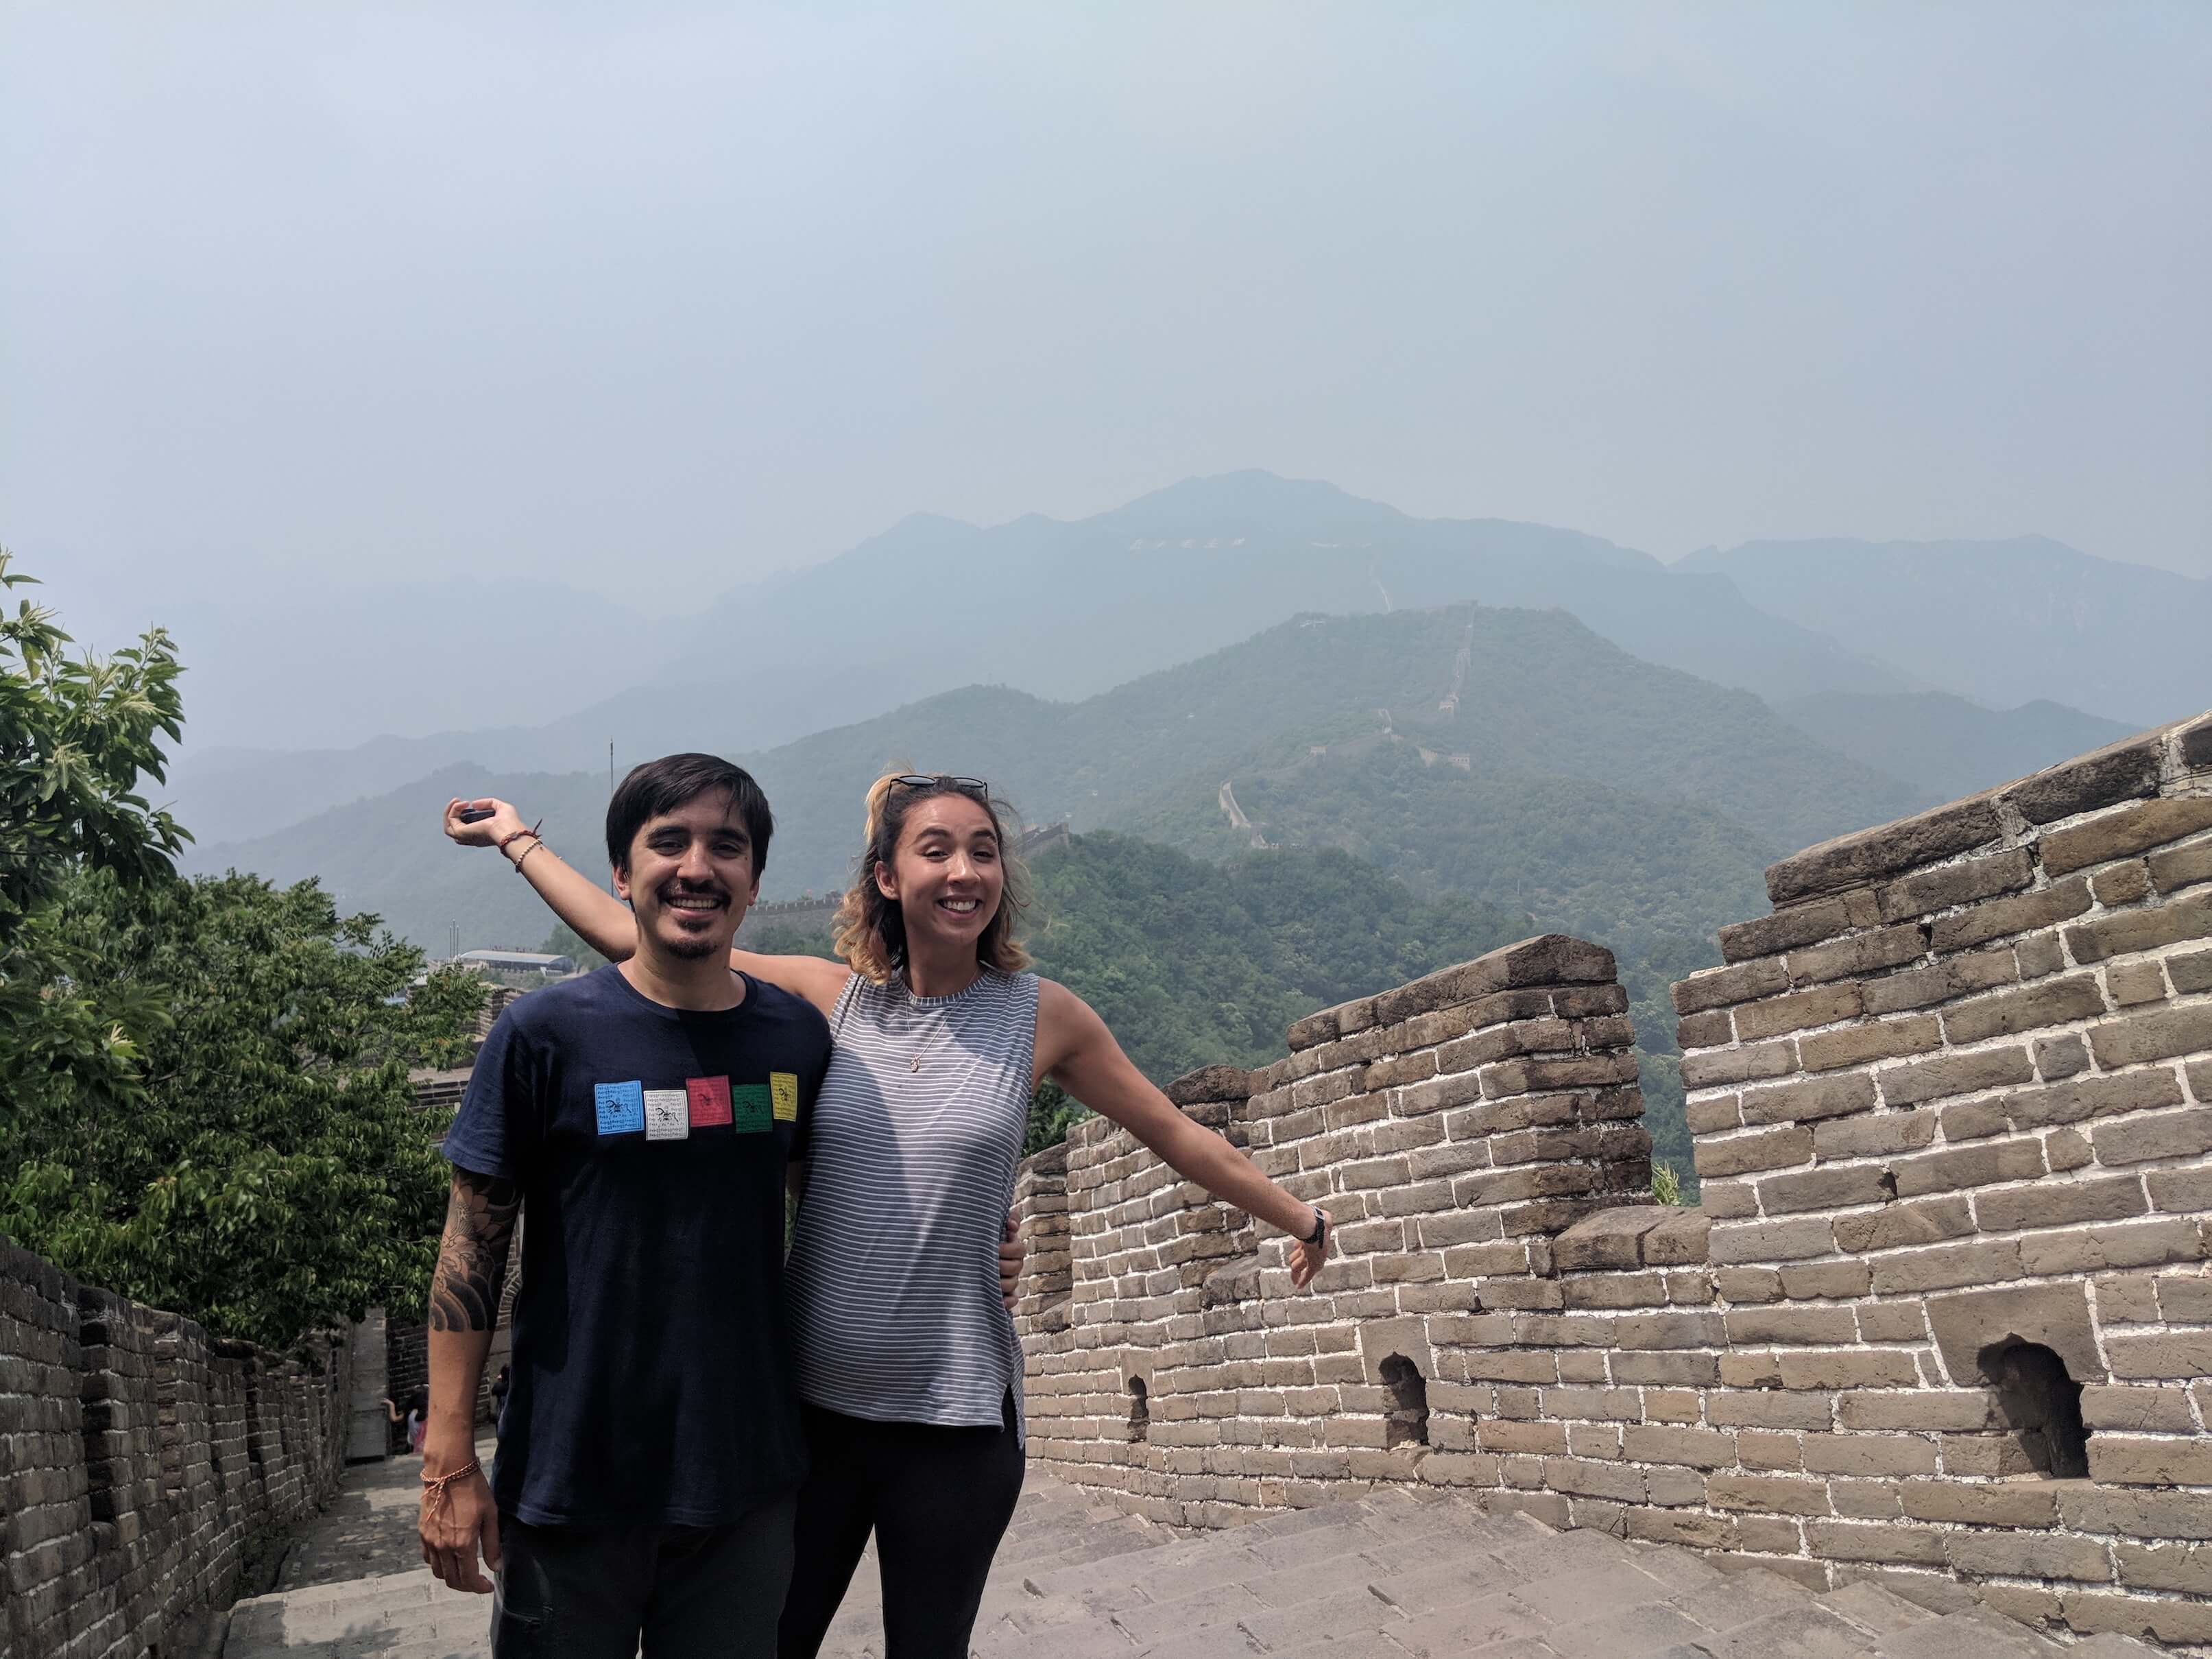 A Year Travelling Together: How We Make It Work